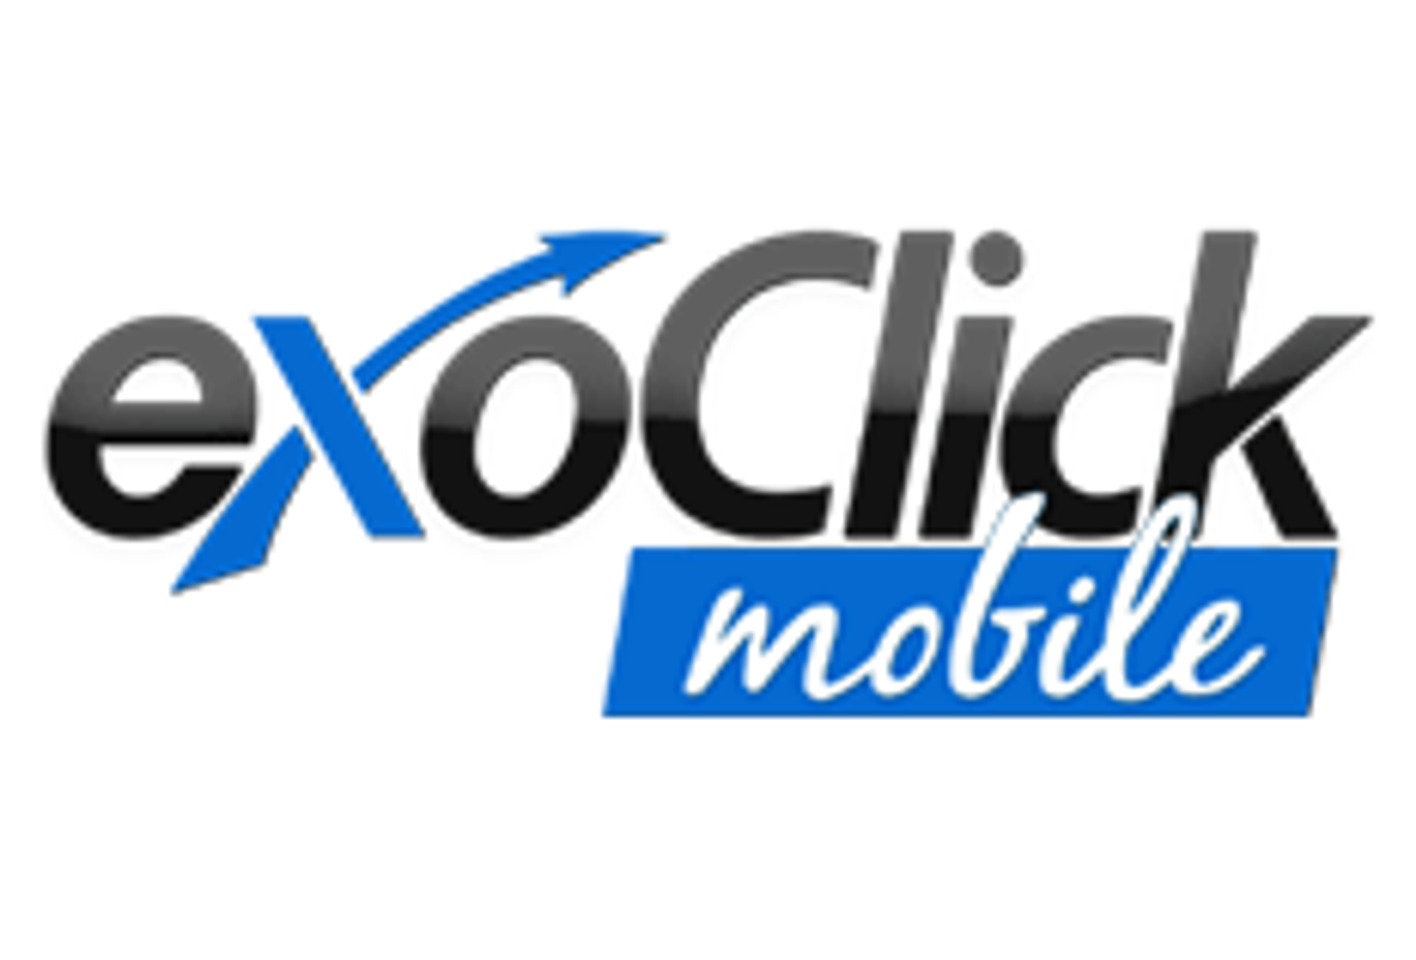 ExoclickMobile Adds Mobile Redirects as Latest Feature